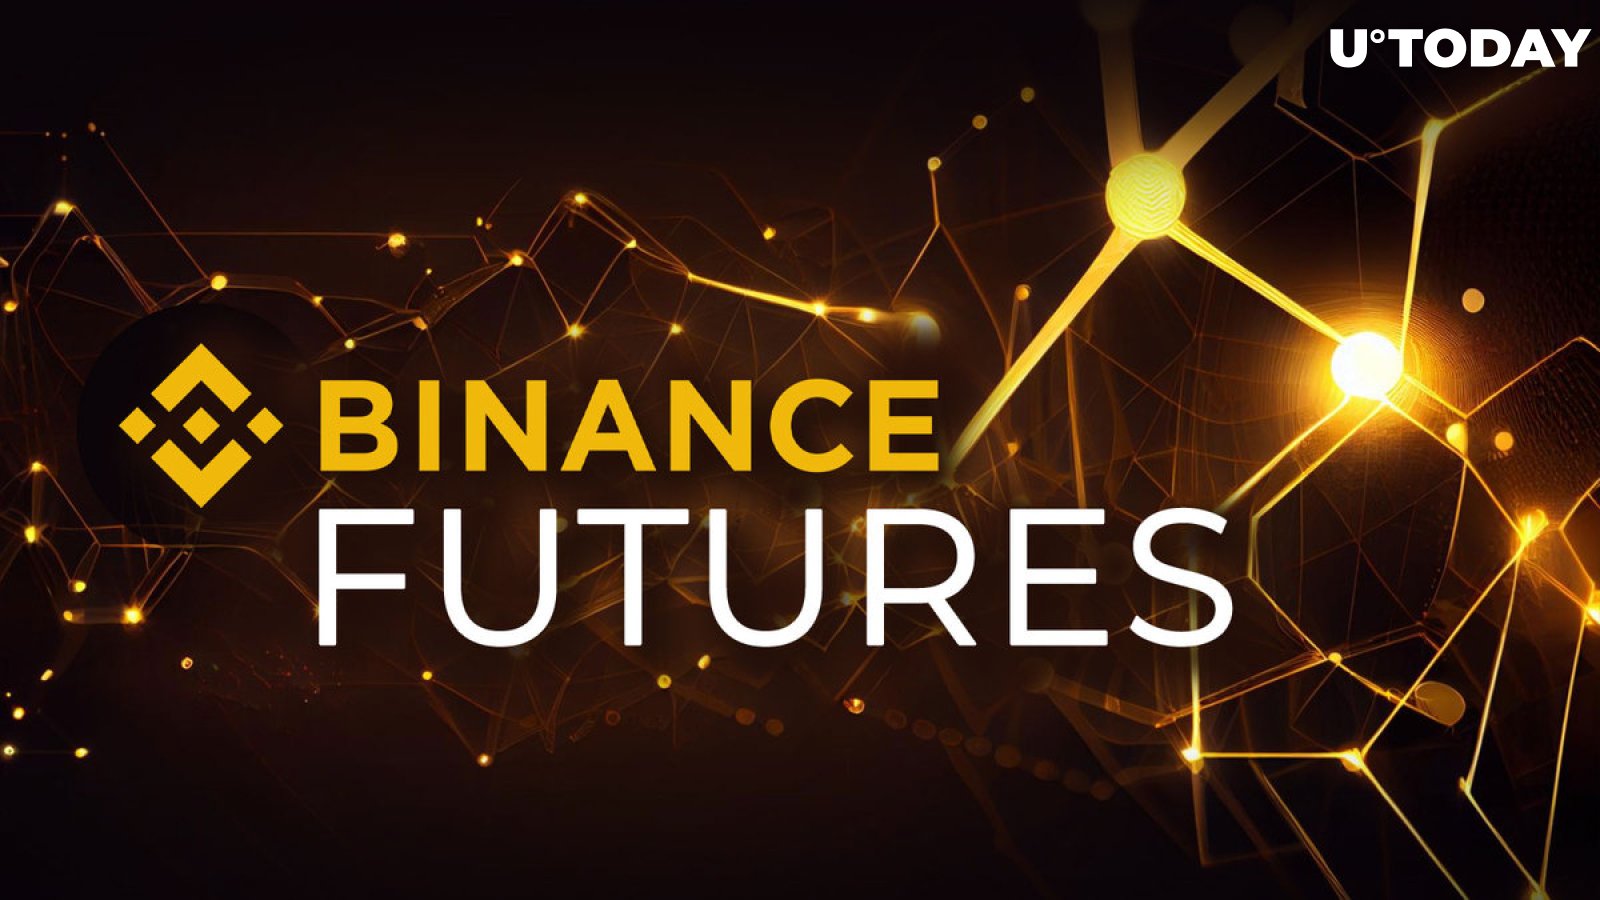 Binance Futures BTC Price Prediction Contest Launches With 4 Tesla Model Ys in Prizes